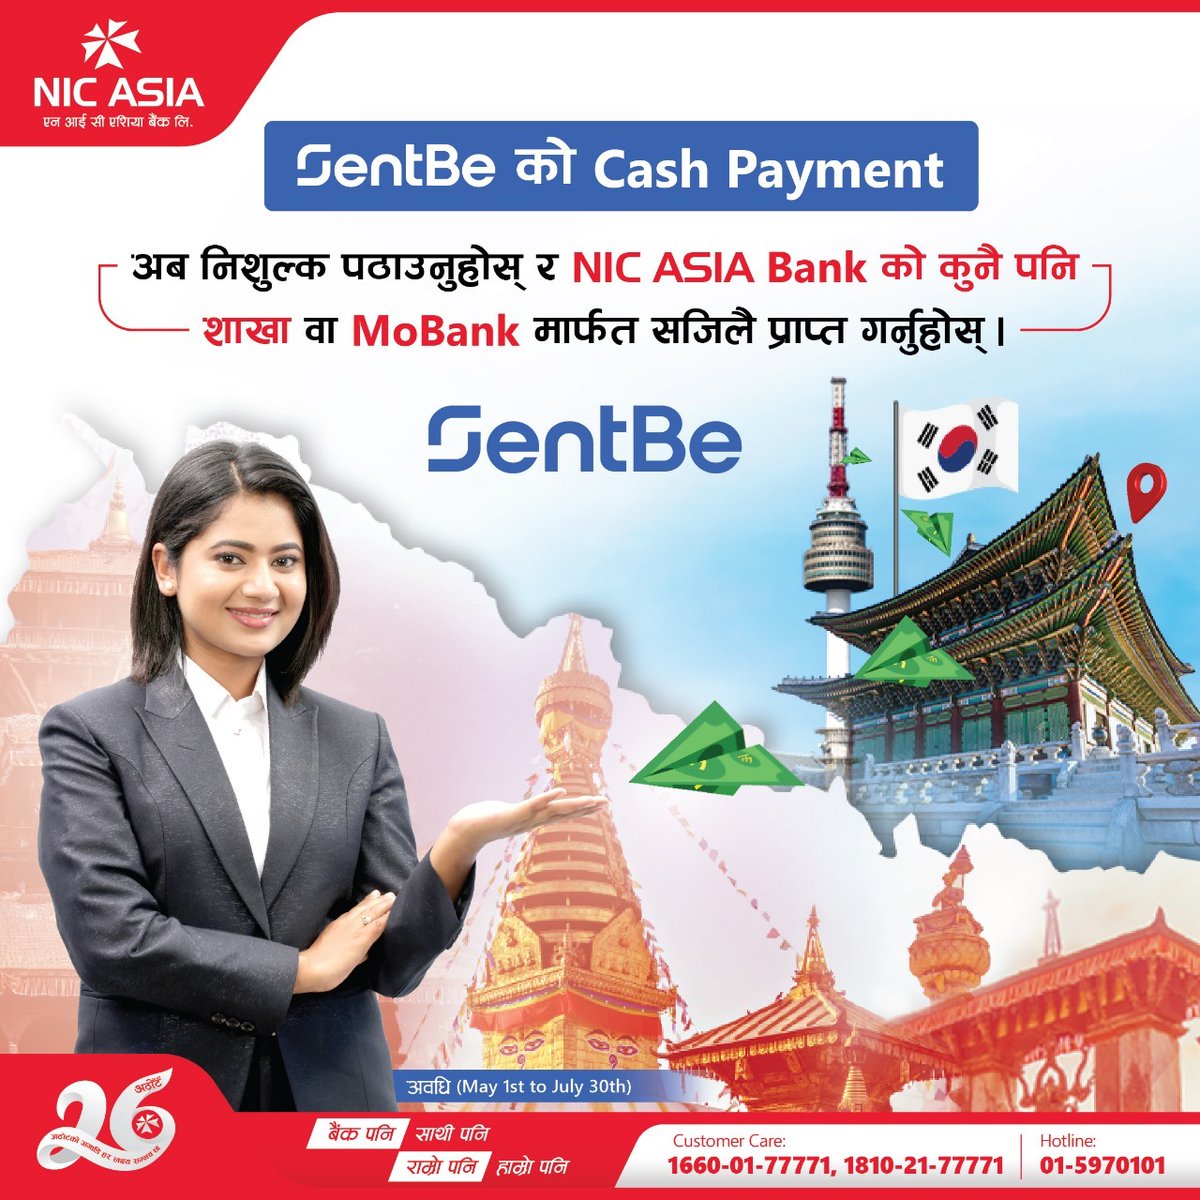 Sending SentBe Cash Payment from South Korea?
Enjoy 𝗳𝗲𝗲-𝗳𝗿𝗲𝗲 sending from South Korea and receive at any of our branches or via MoBank! 

Offer Validity: 1st May to 30th July, 2024

#NICASIABank #DigitalFirst #MoBank #SentBe #Remittance #FeeFree